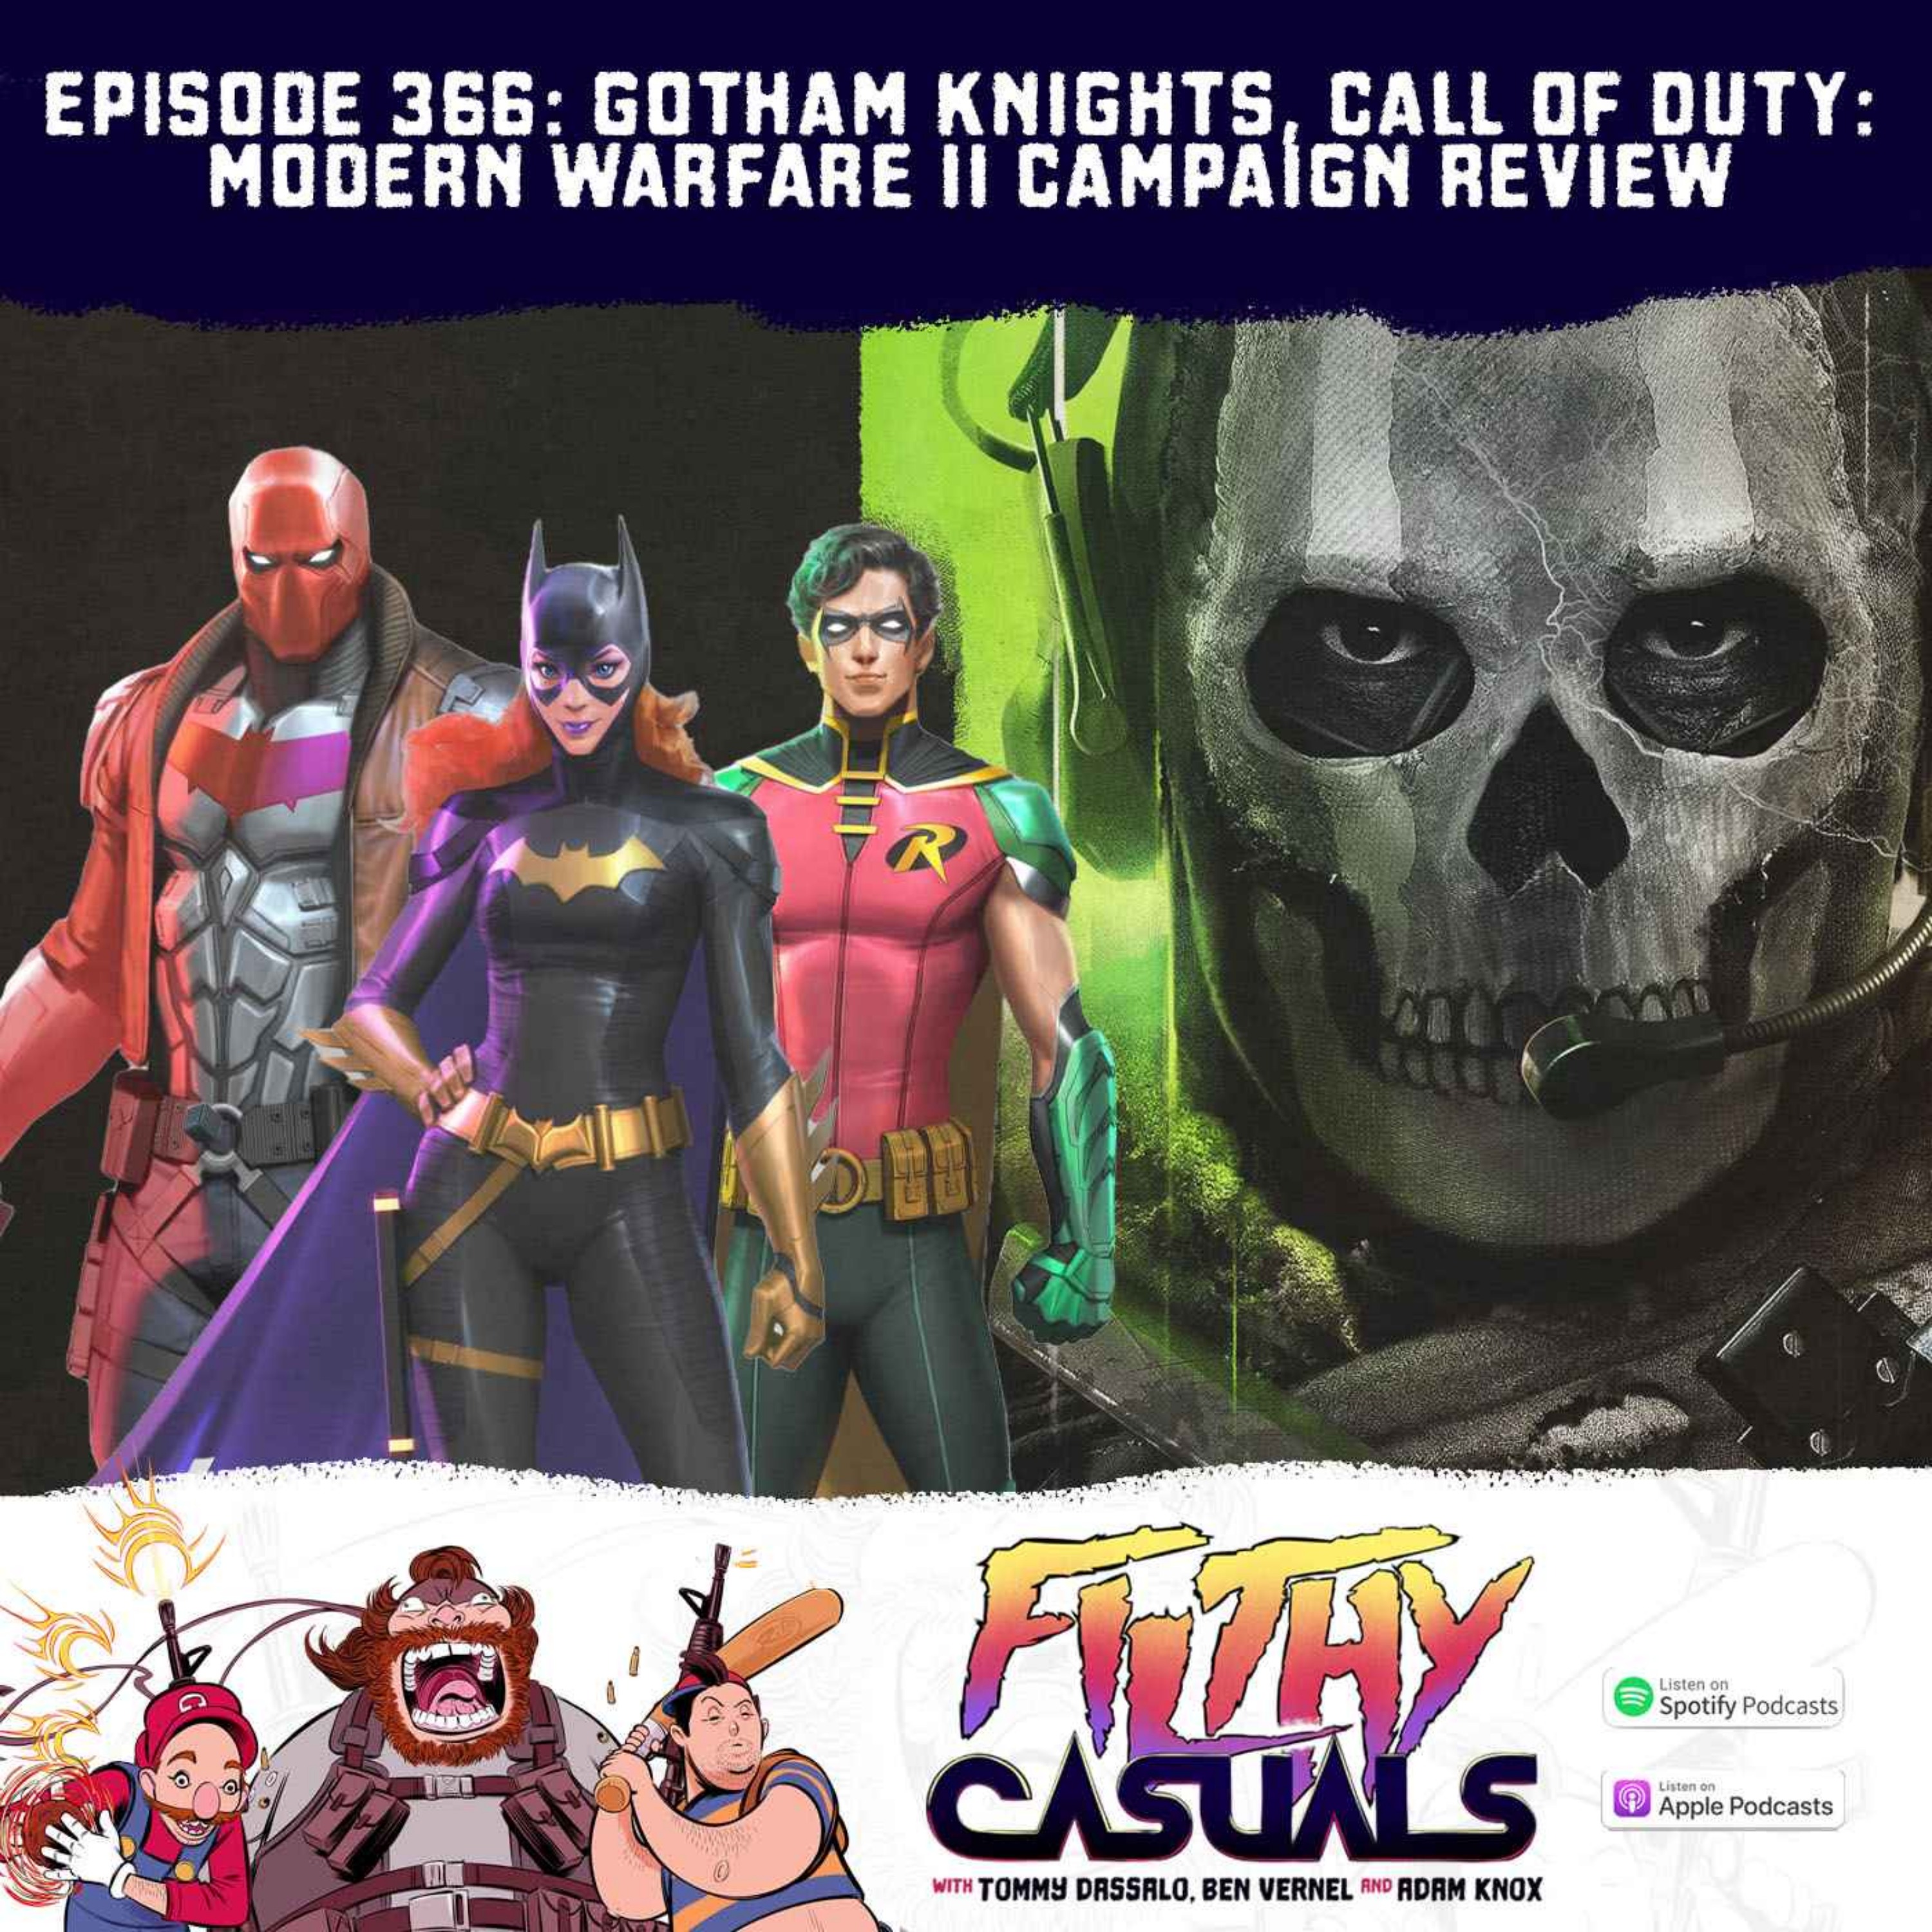 Episode 366: Gotham Knights, Call of Duty: Modern Warfare II Campaign Review